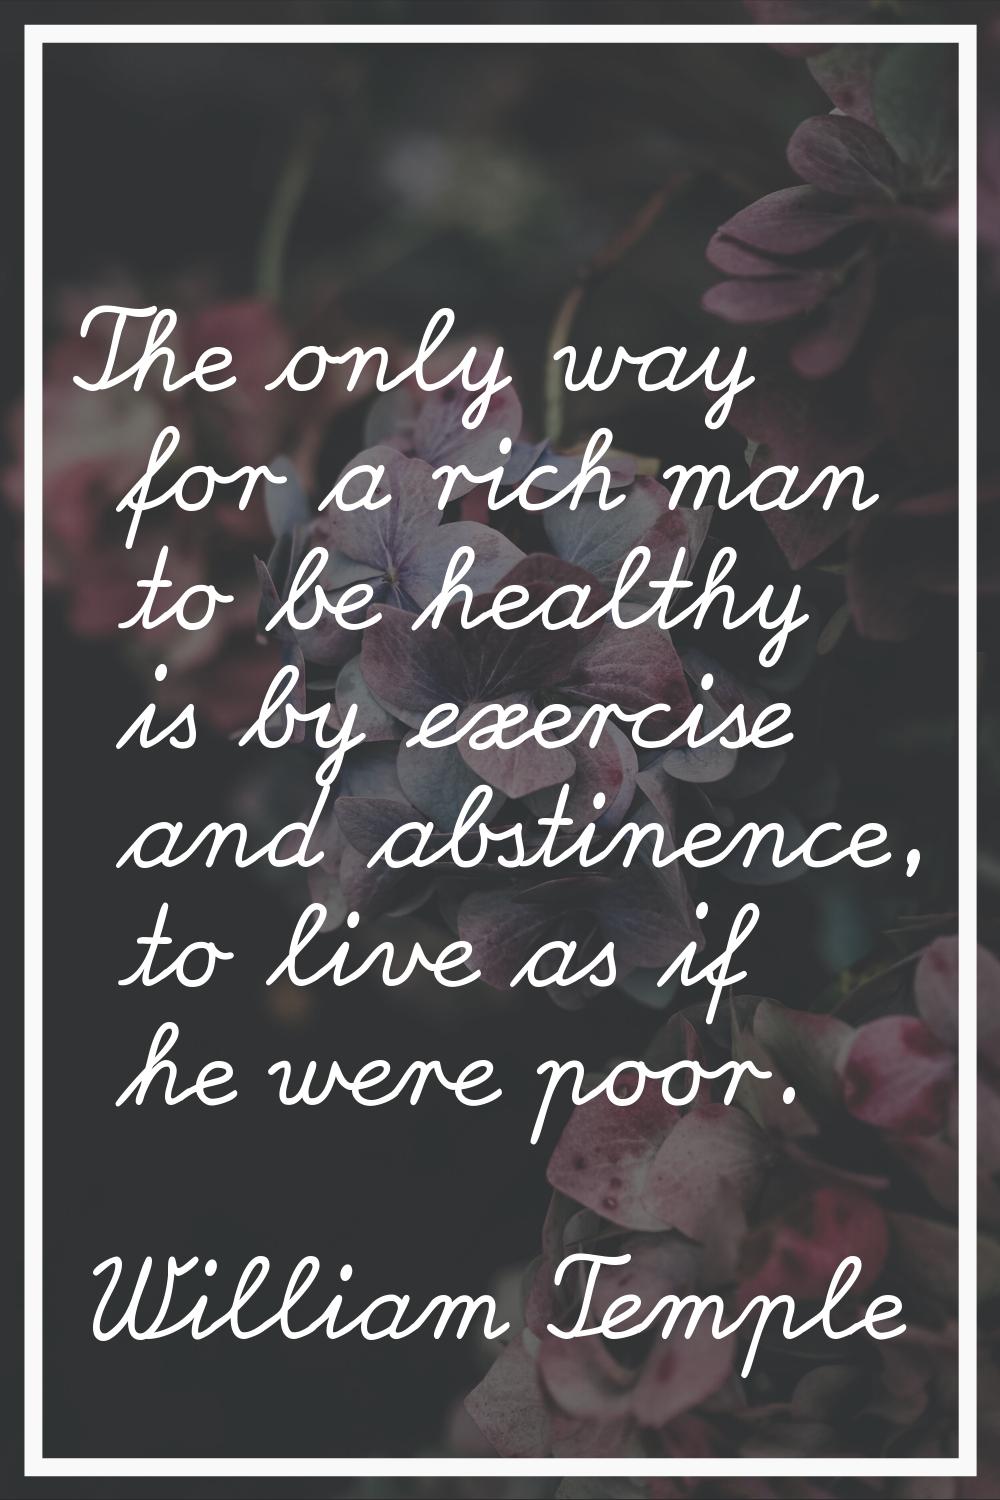 The only way for a rich man to be healthy is by exercise and abstinence, to live as if he were poor